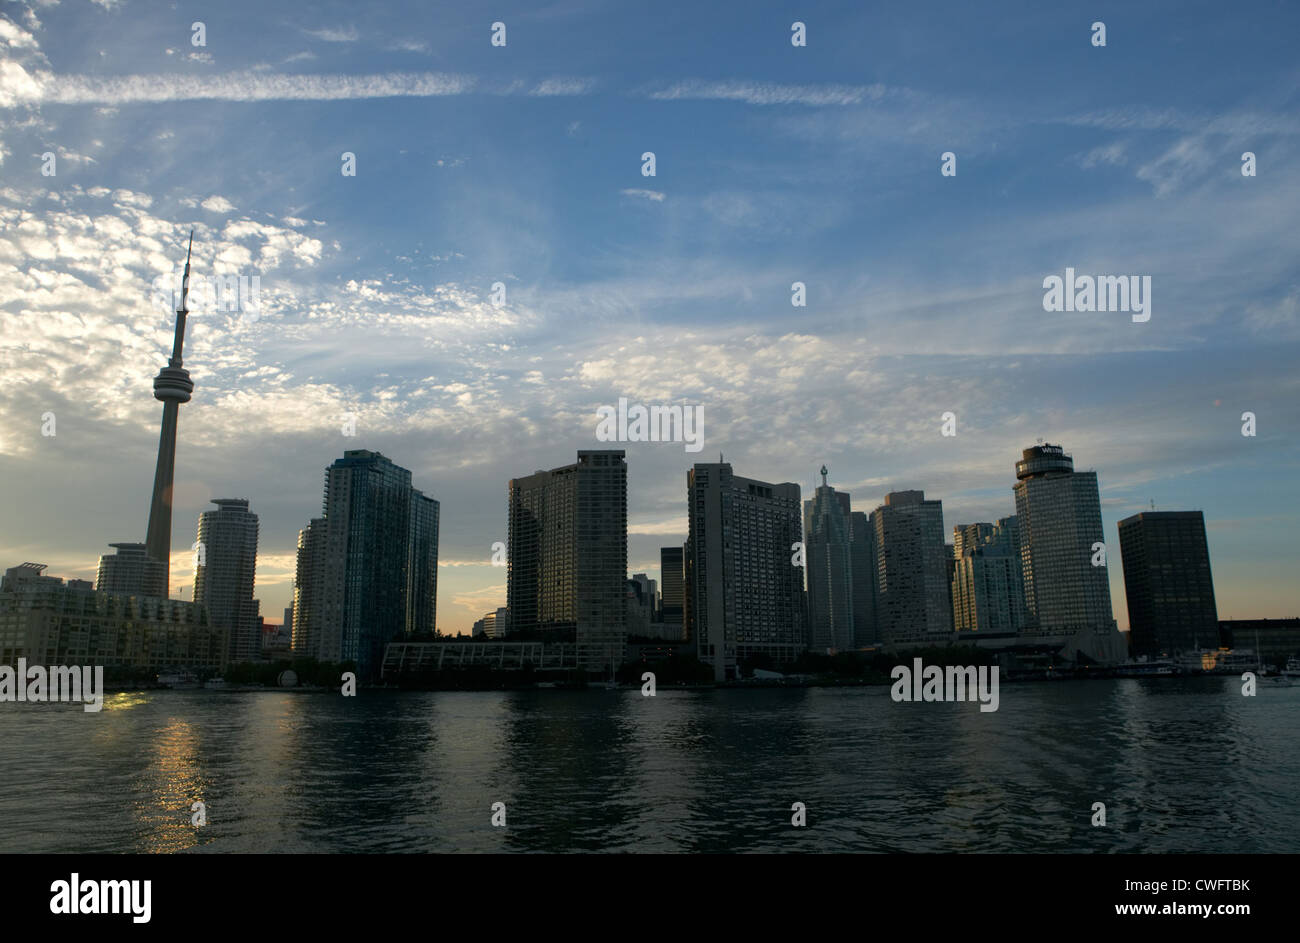 Toronto - Skyline with skyscrapers and the CN Tower in the backlight Stock Photo